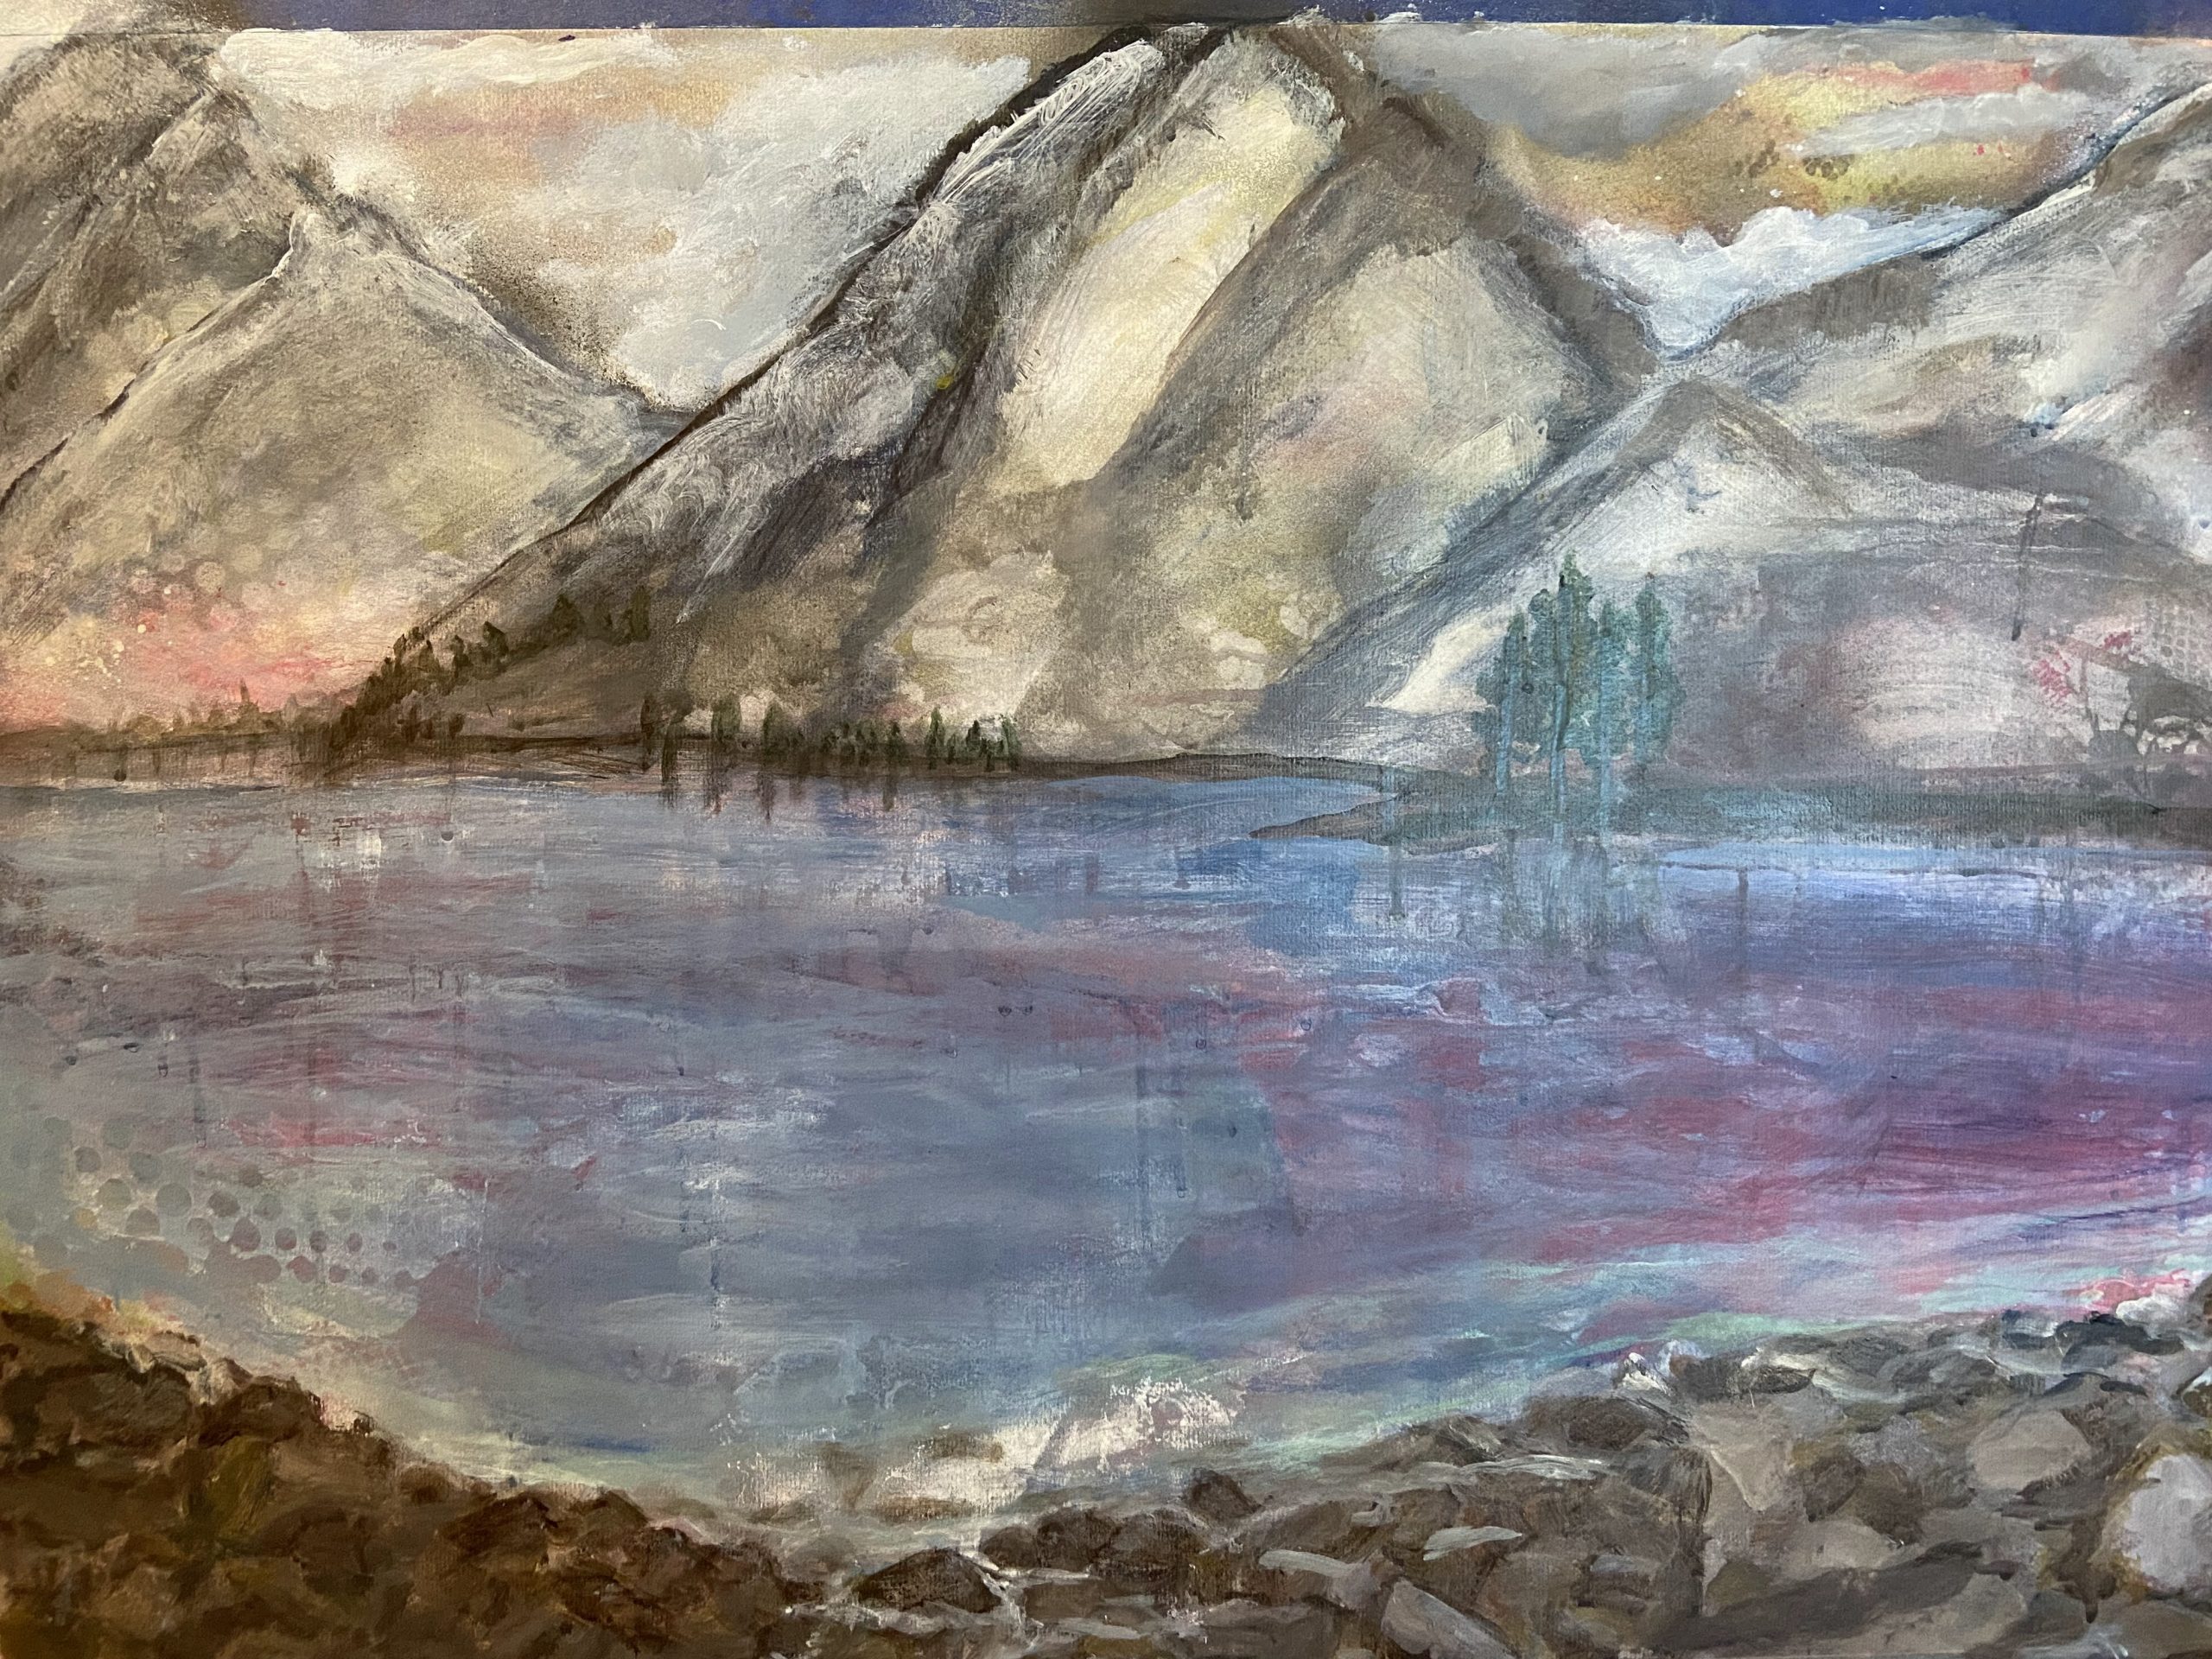 A painting of a mountain scene with a lake